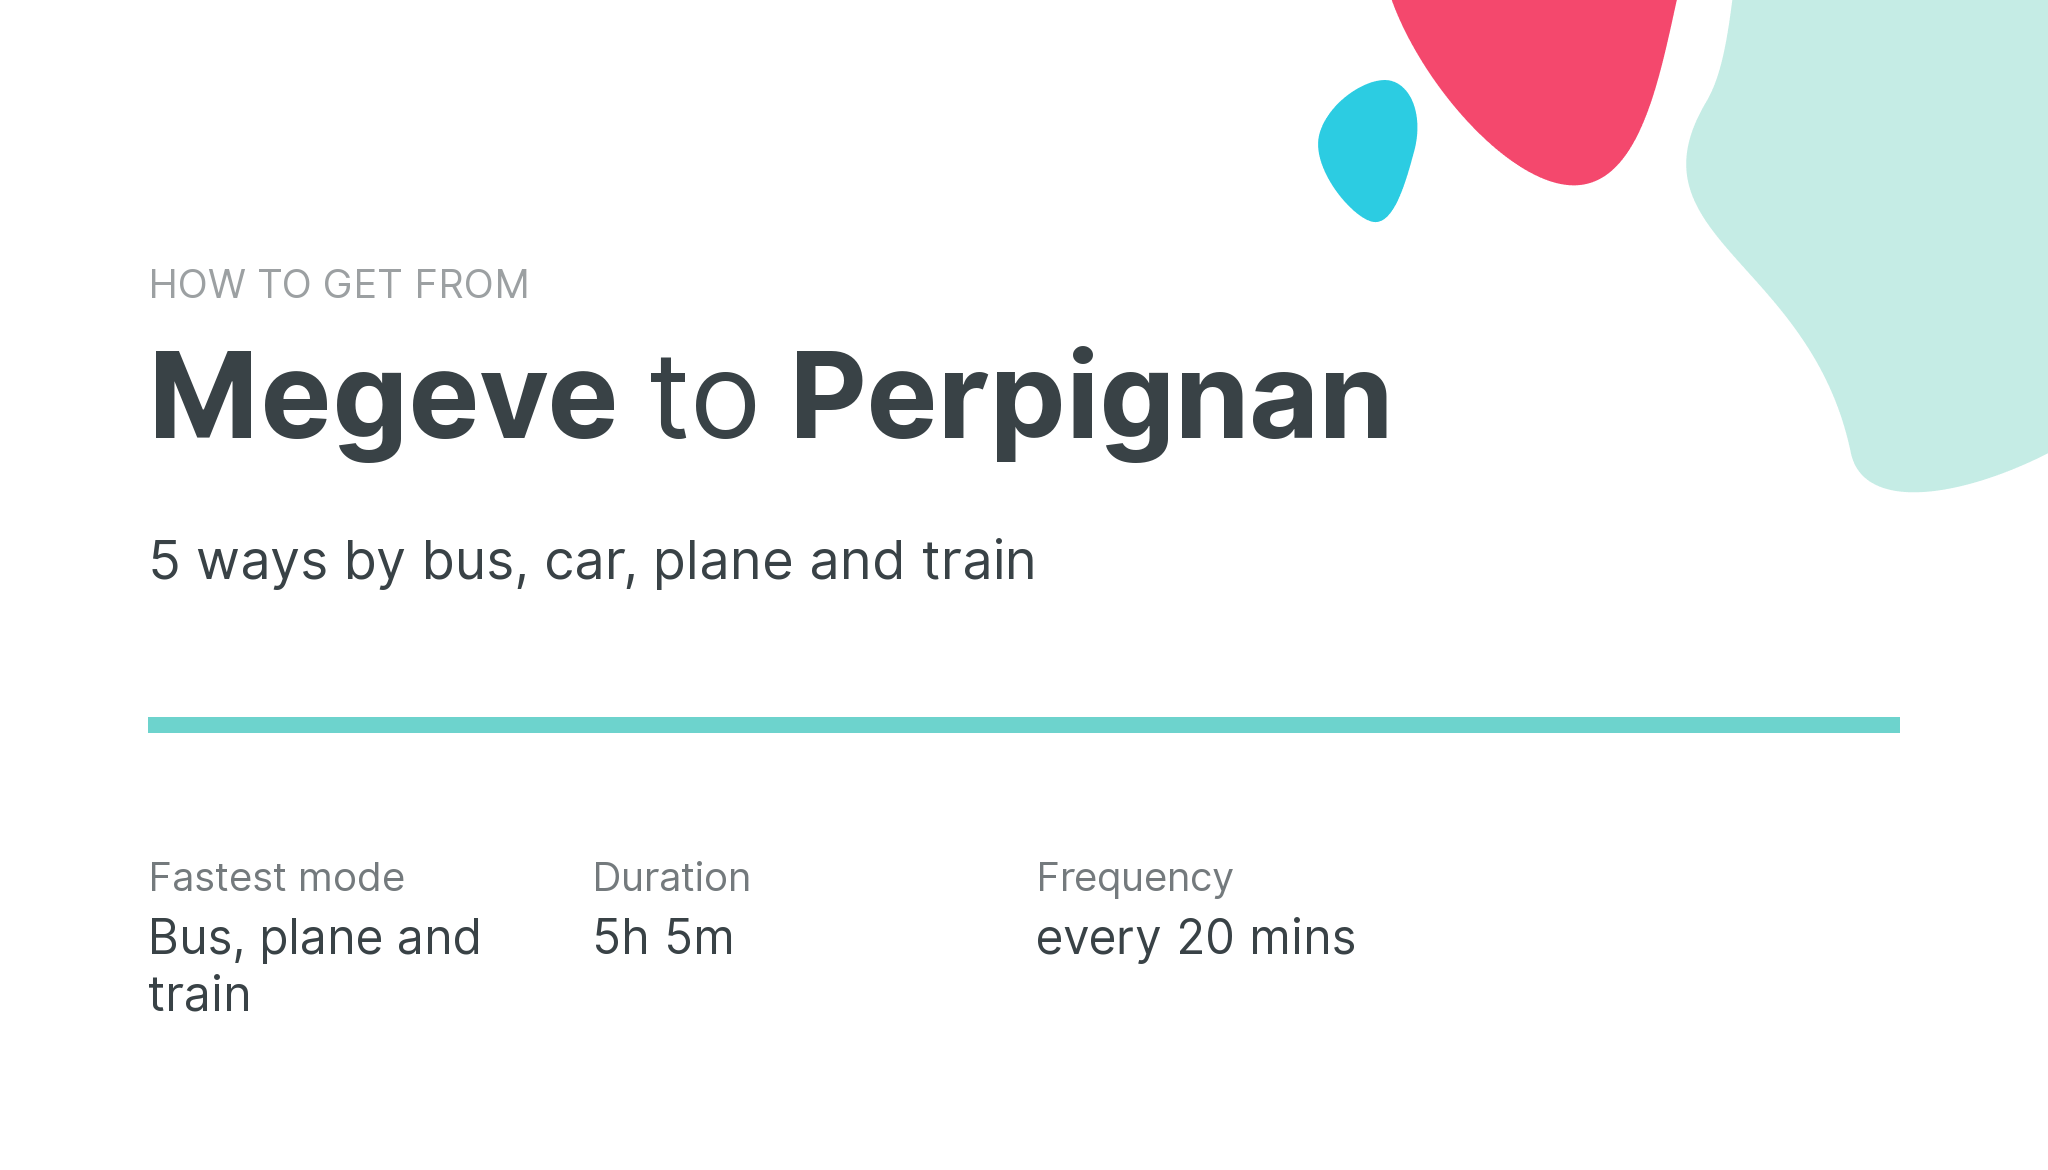 How do I get from Megeve to Perpignan